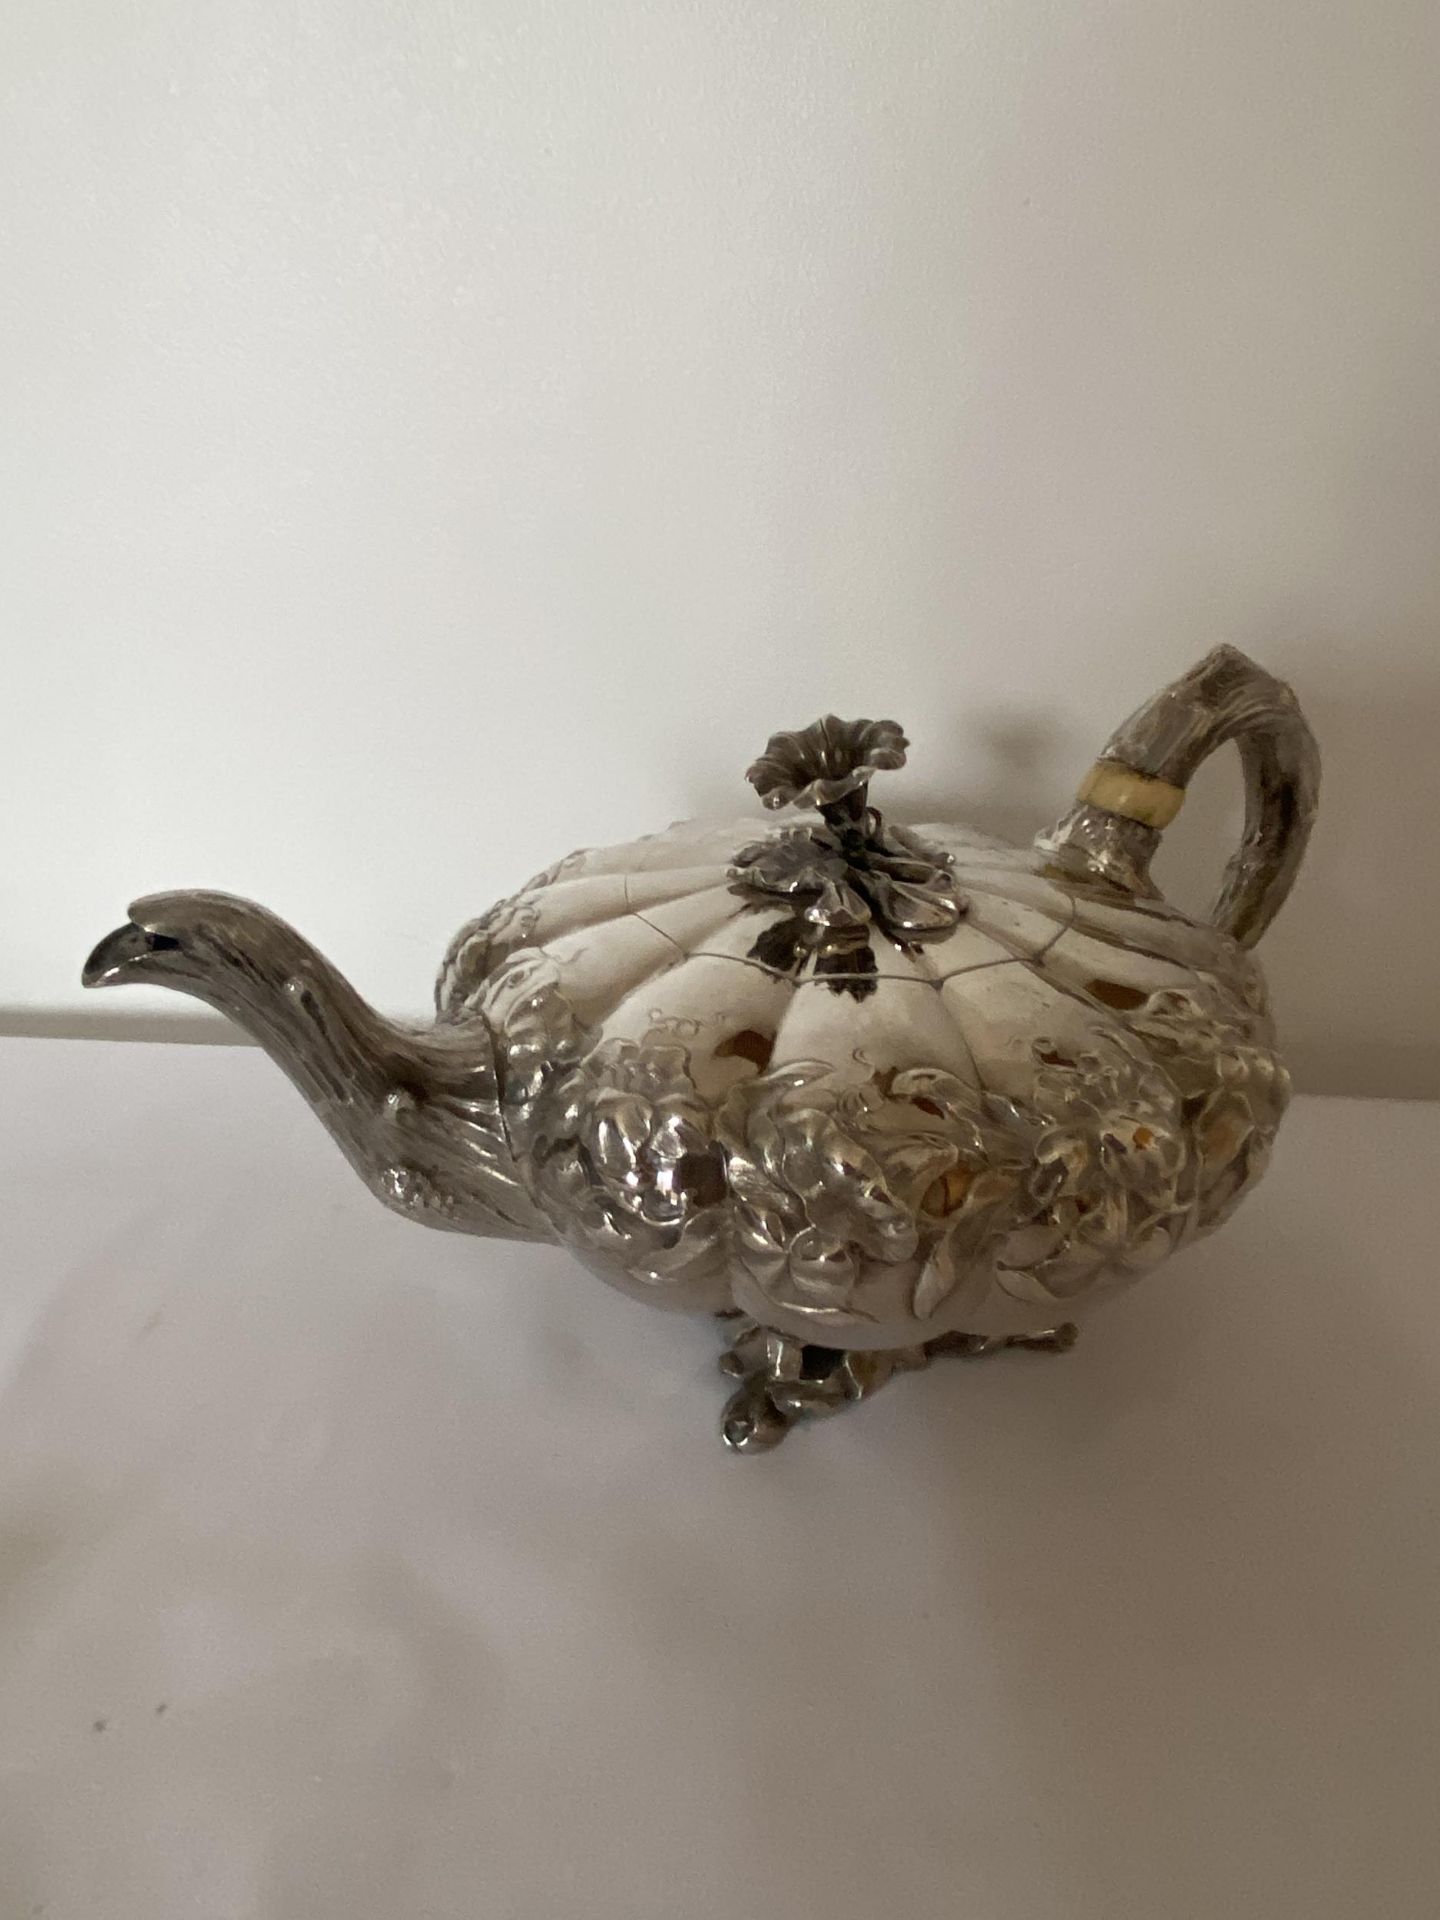 A VICTORIAN 1840 HALLMARKED LONDON SILVER TEAPOT, MAKER WC, POSSIBLY WILLIAM CHANDLESS, GROSS WEIGHT - Image 5 of 21